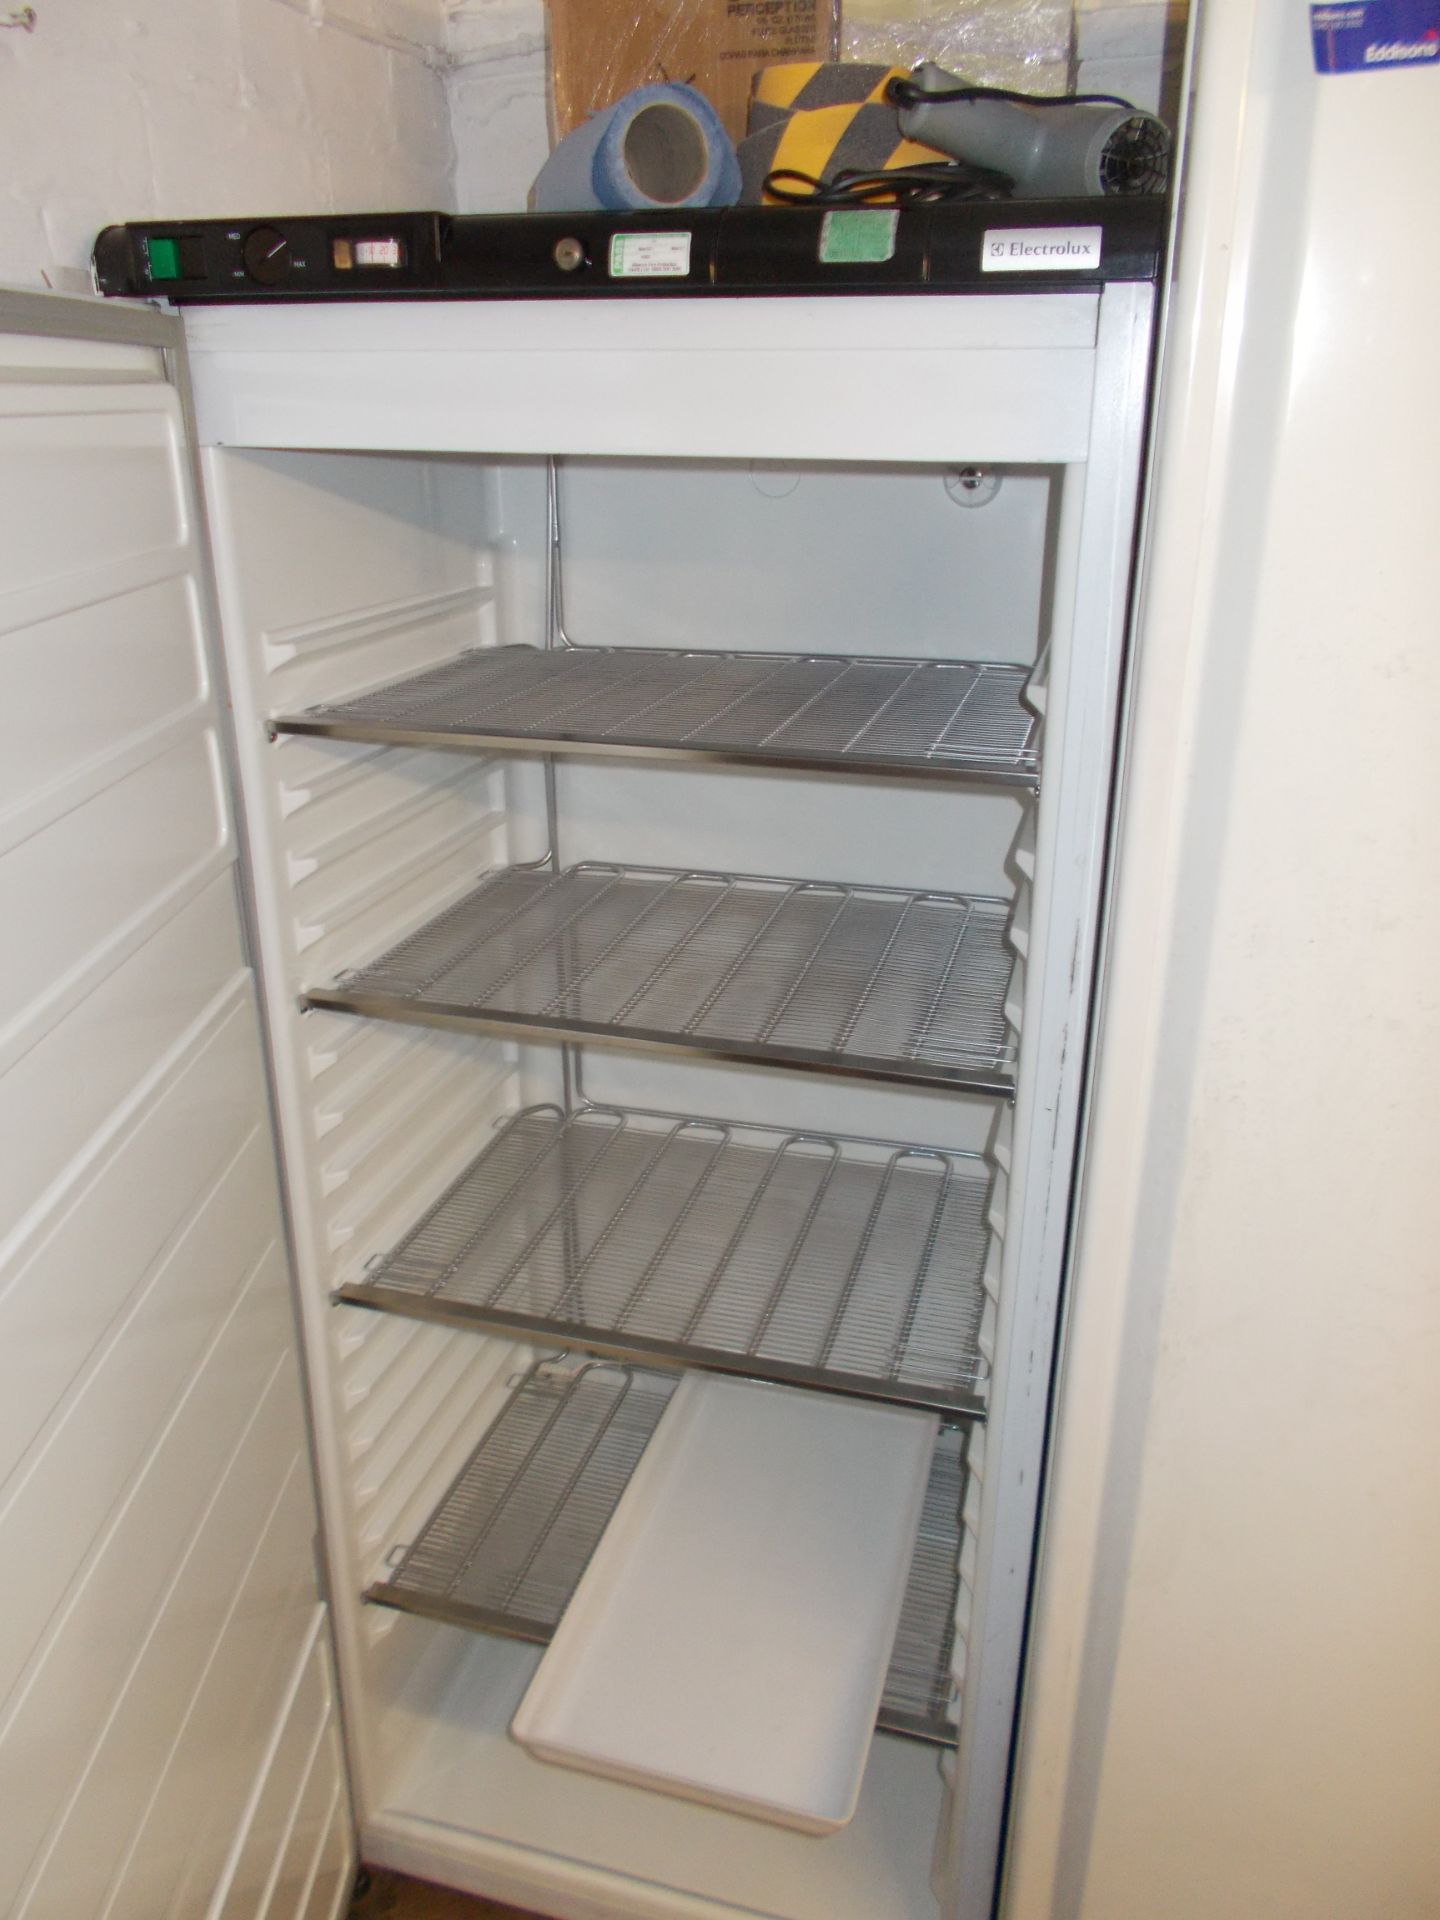 Electrolux upright freezer. Dimensions: H: 5ft 4 x W: 2ft 3 x D: 2ft. *Please note, this item is - Image 2 of 2